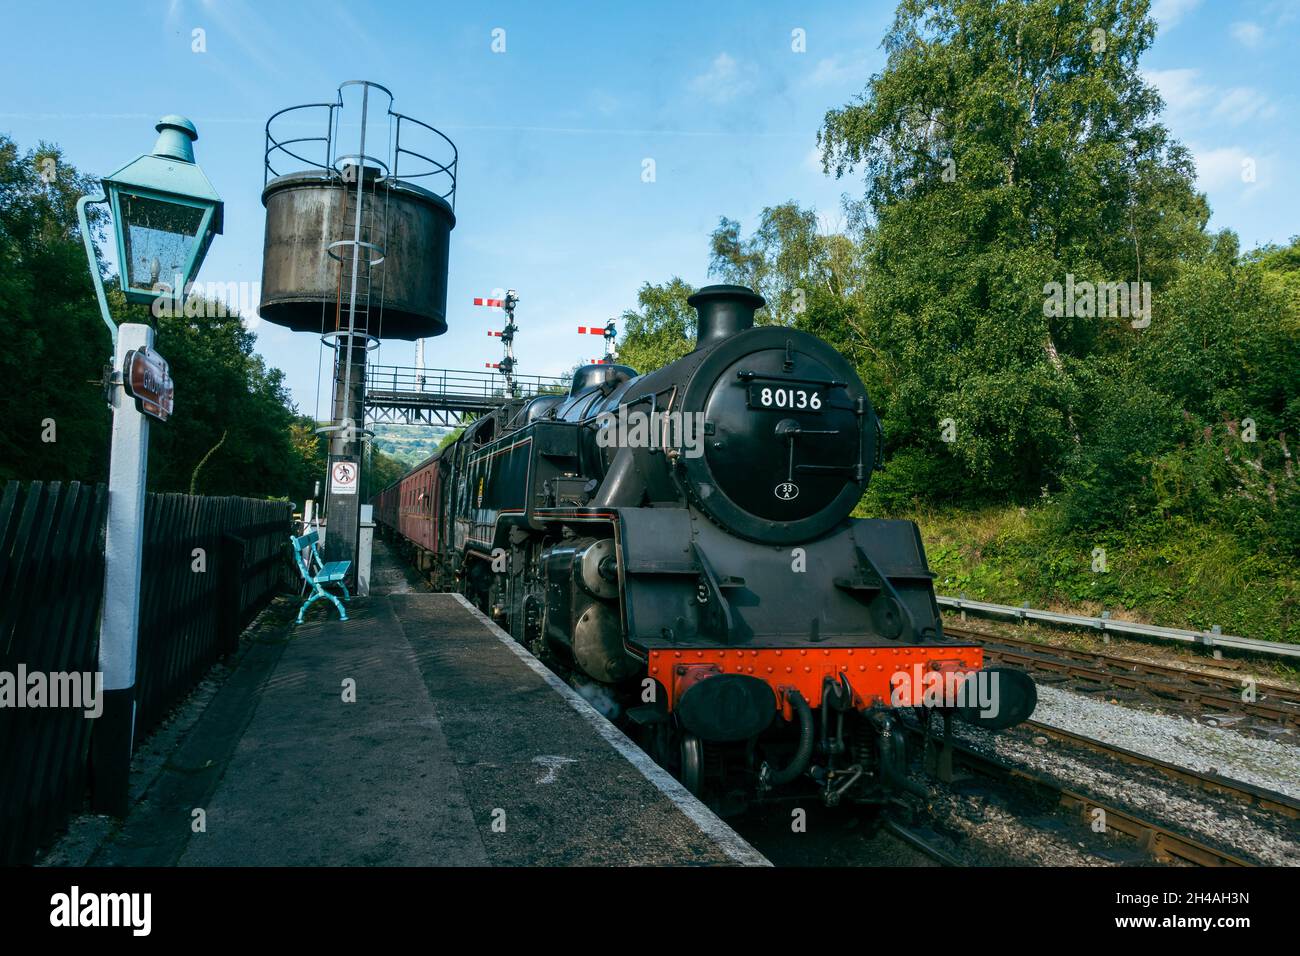 Steam train, The Moorlander,after filling up with water from the water tower, Grosmont station on the North York Moors Heritage Railway, UK Stock Photo